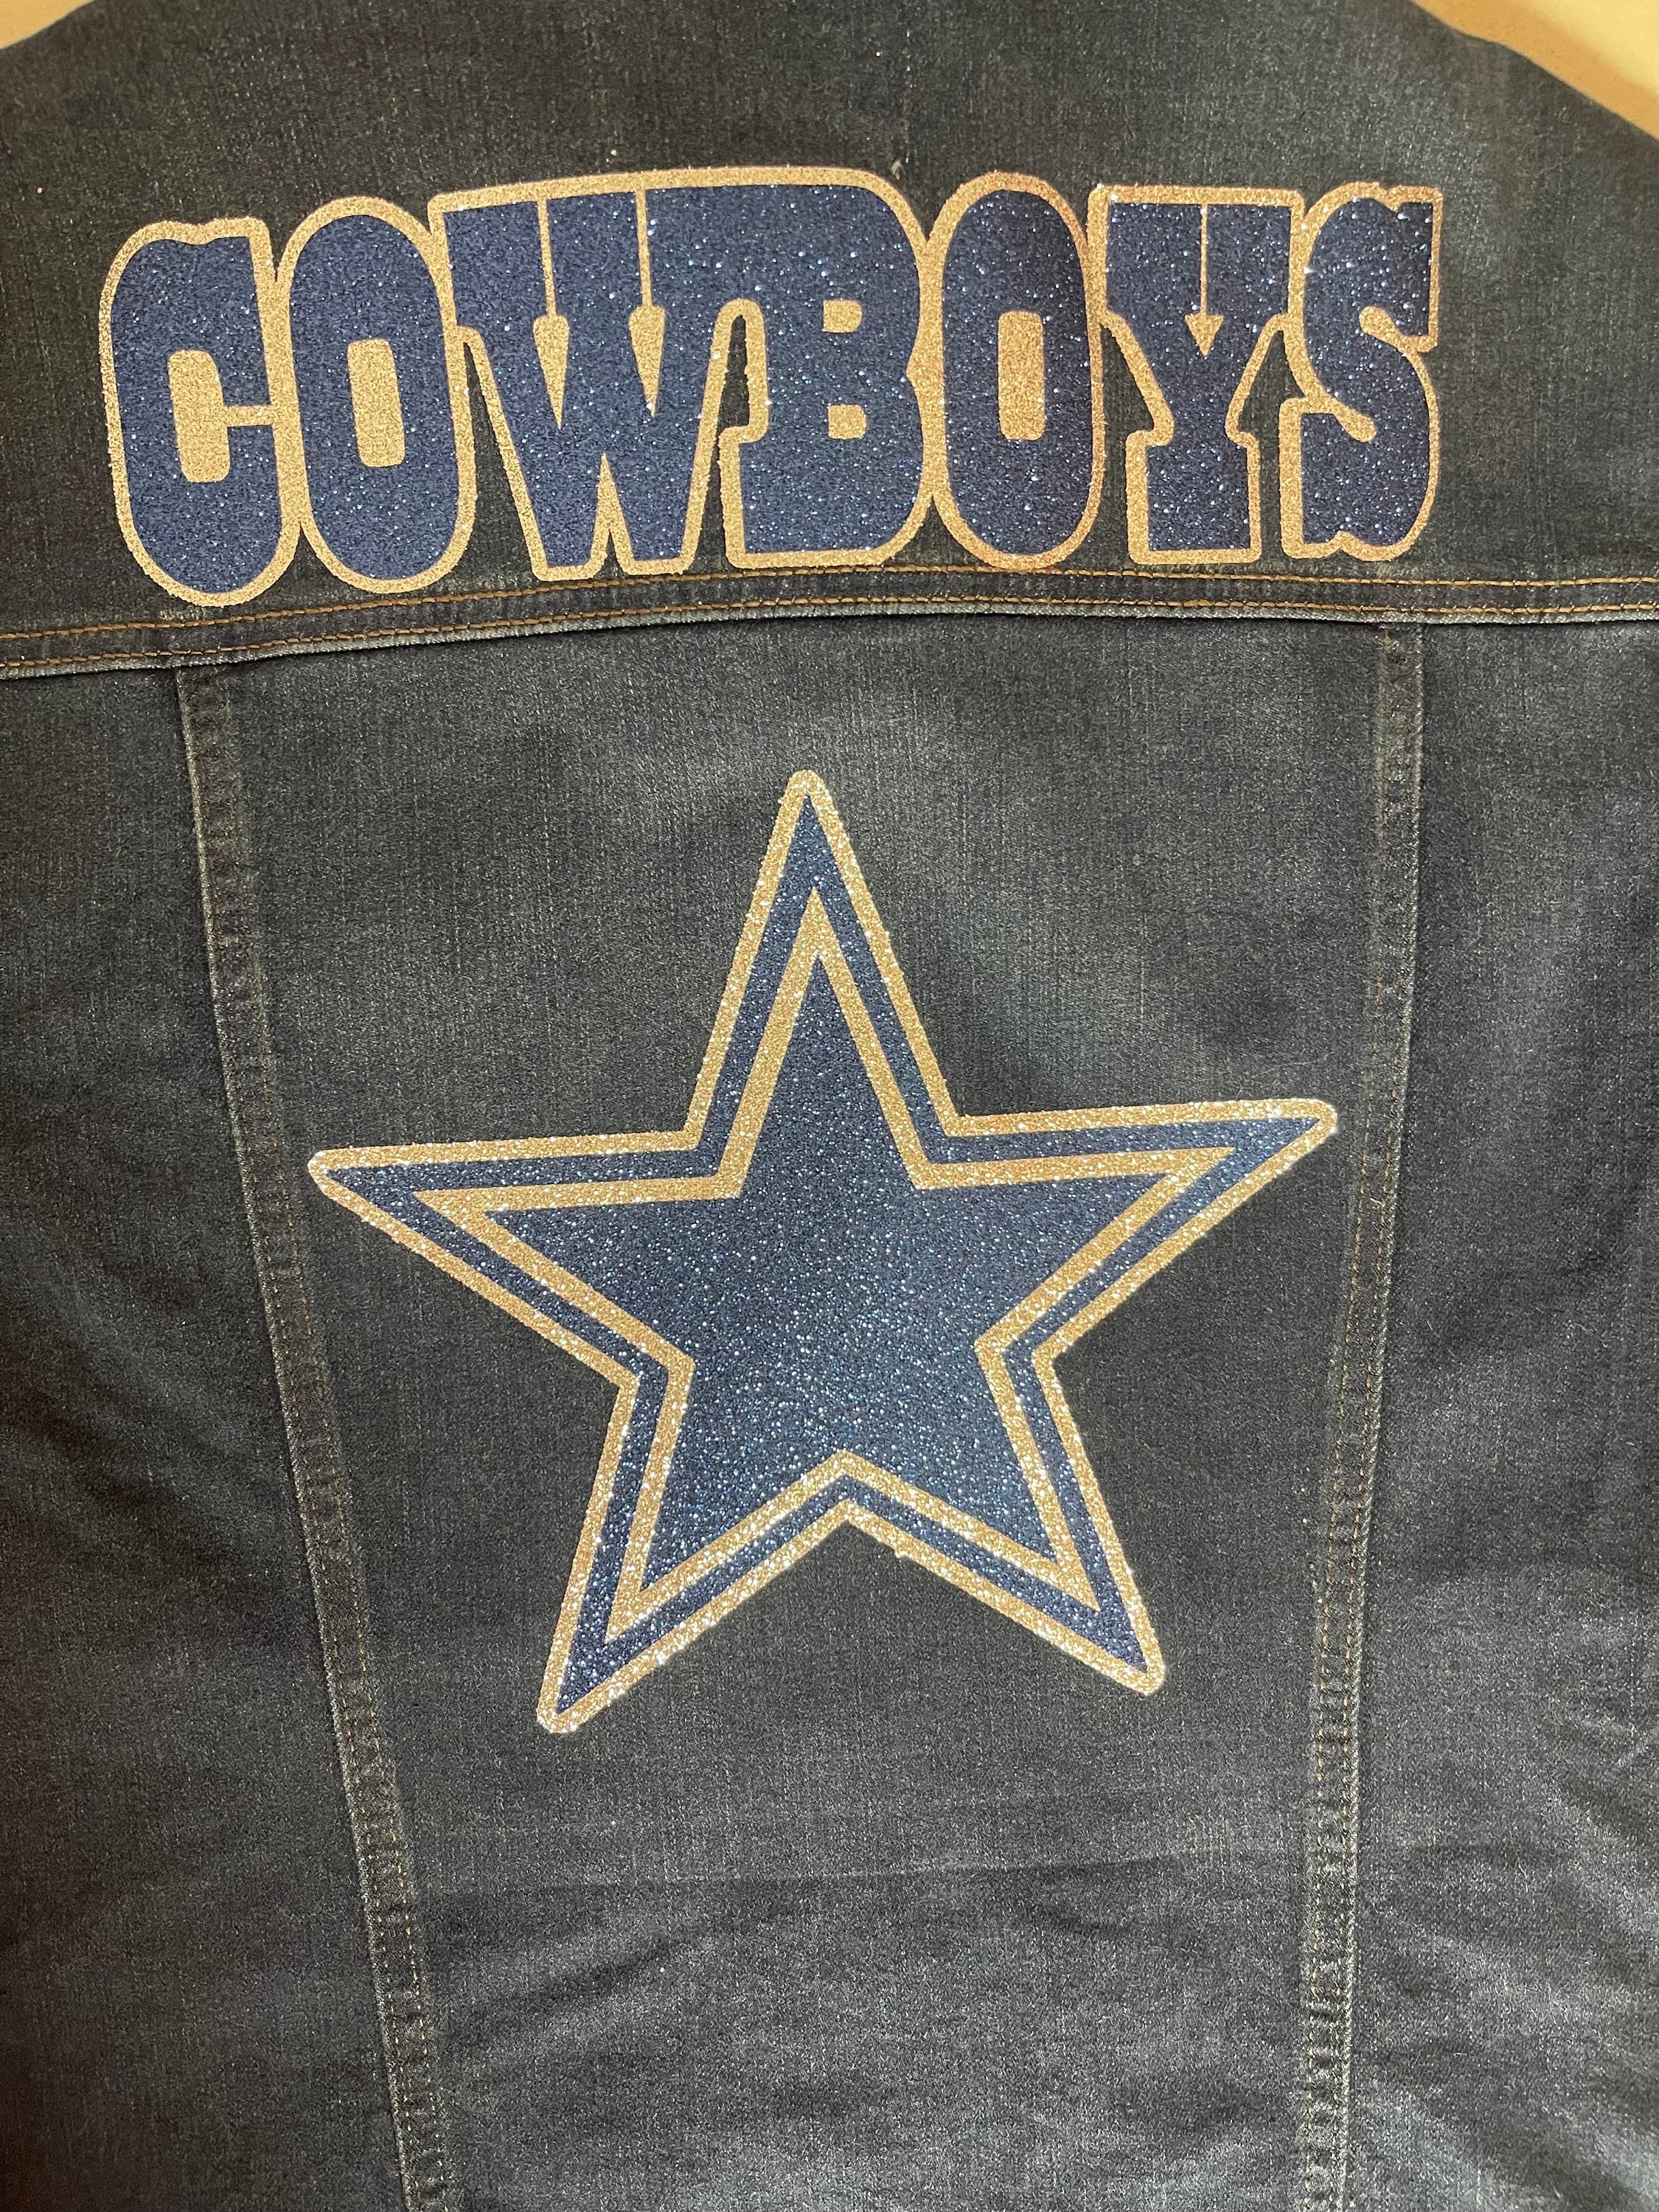 Cowboys Embroidered Applique Iron on Patch 4 X 2 